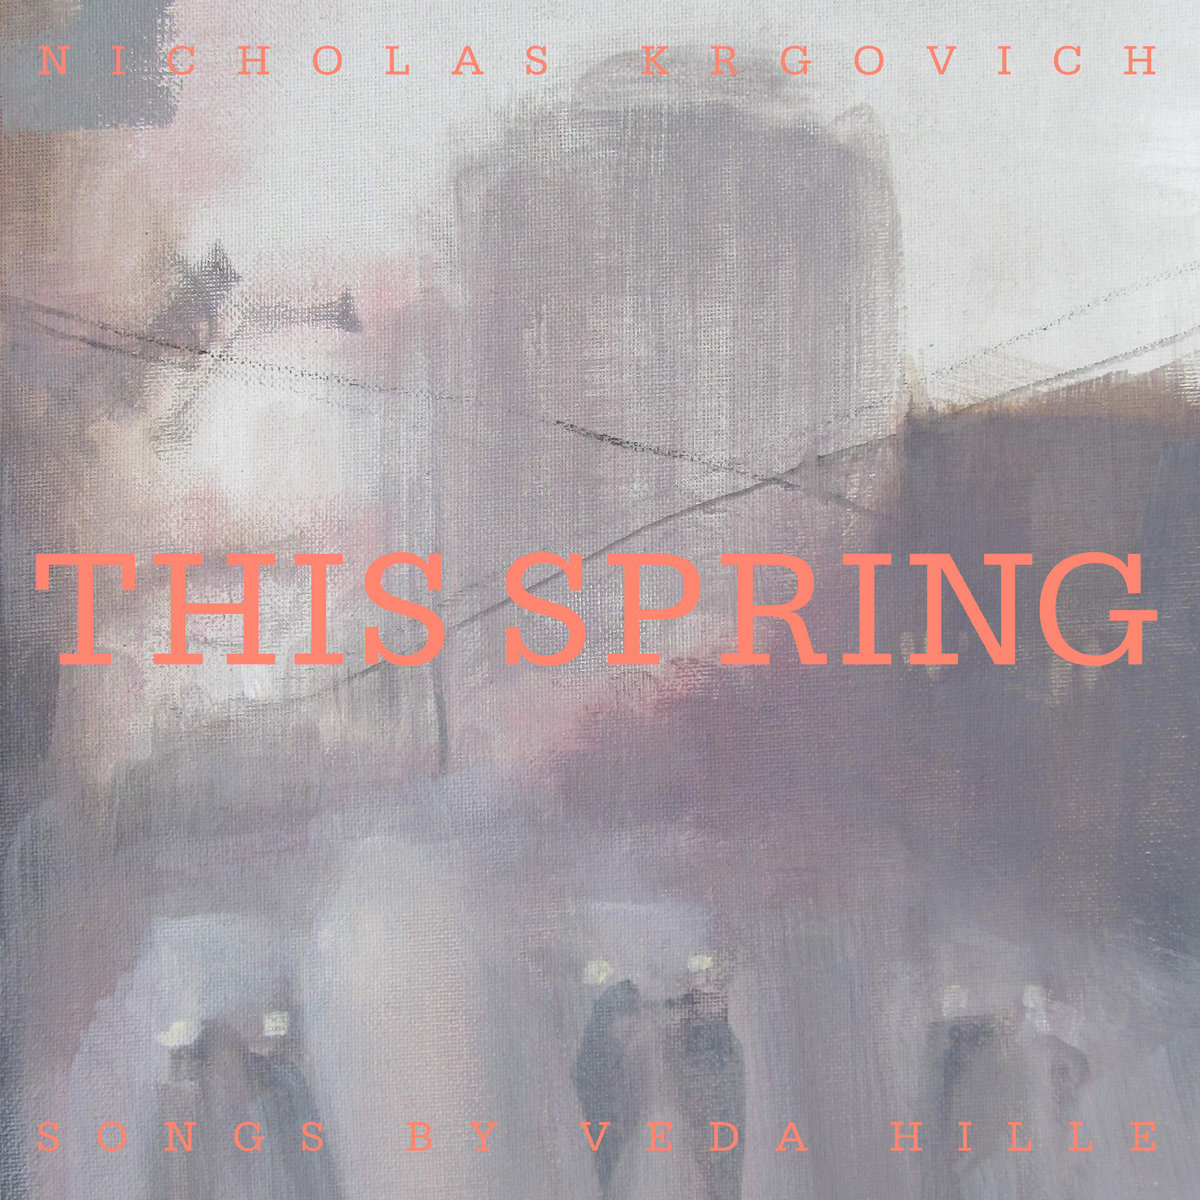 Image for This Spring, Songs By Veda Hille